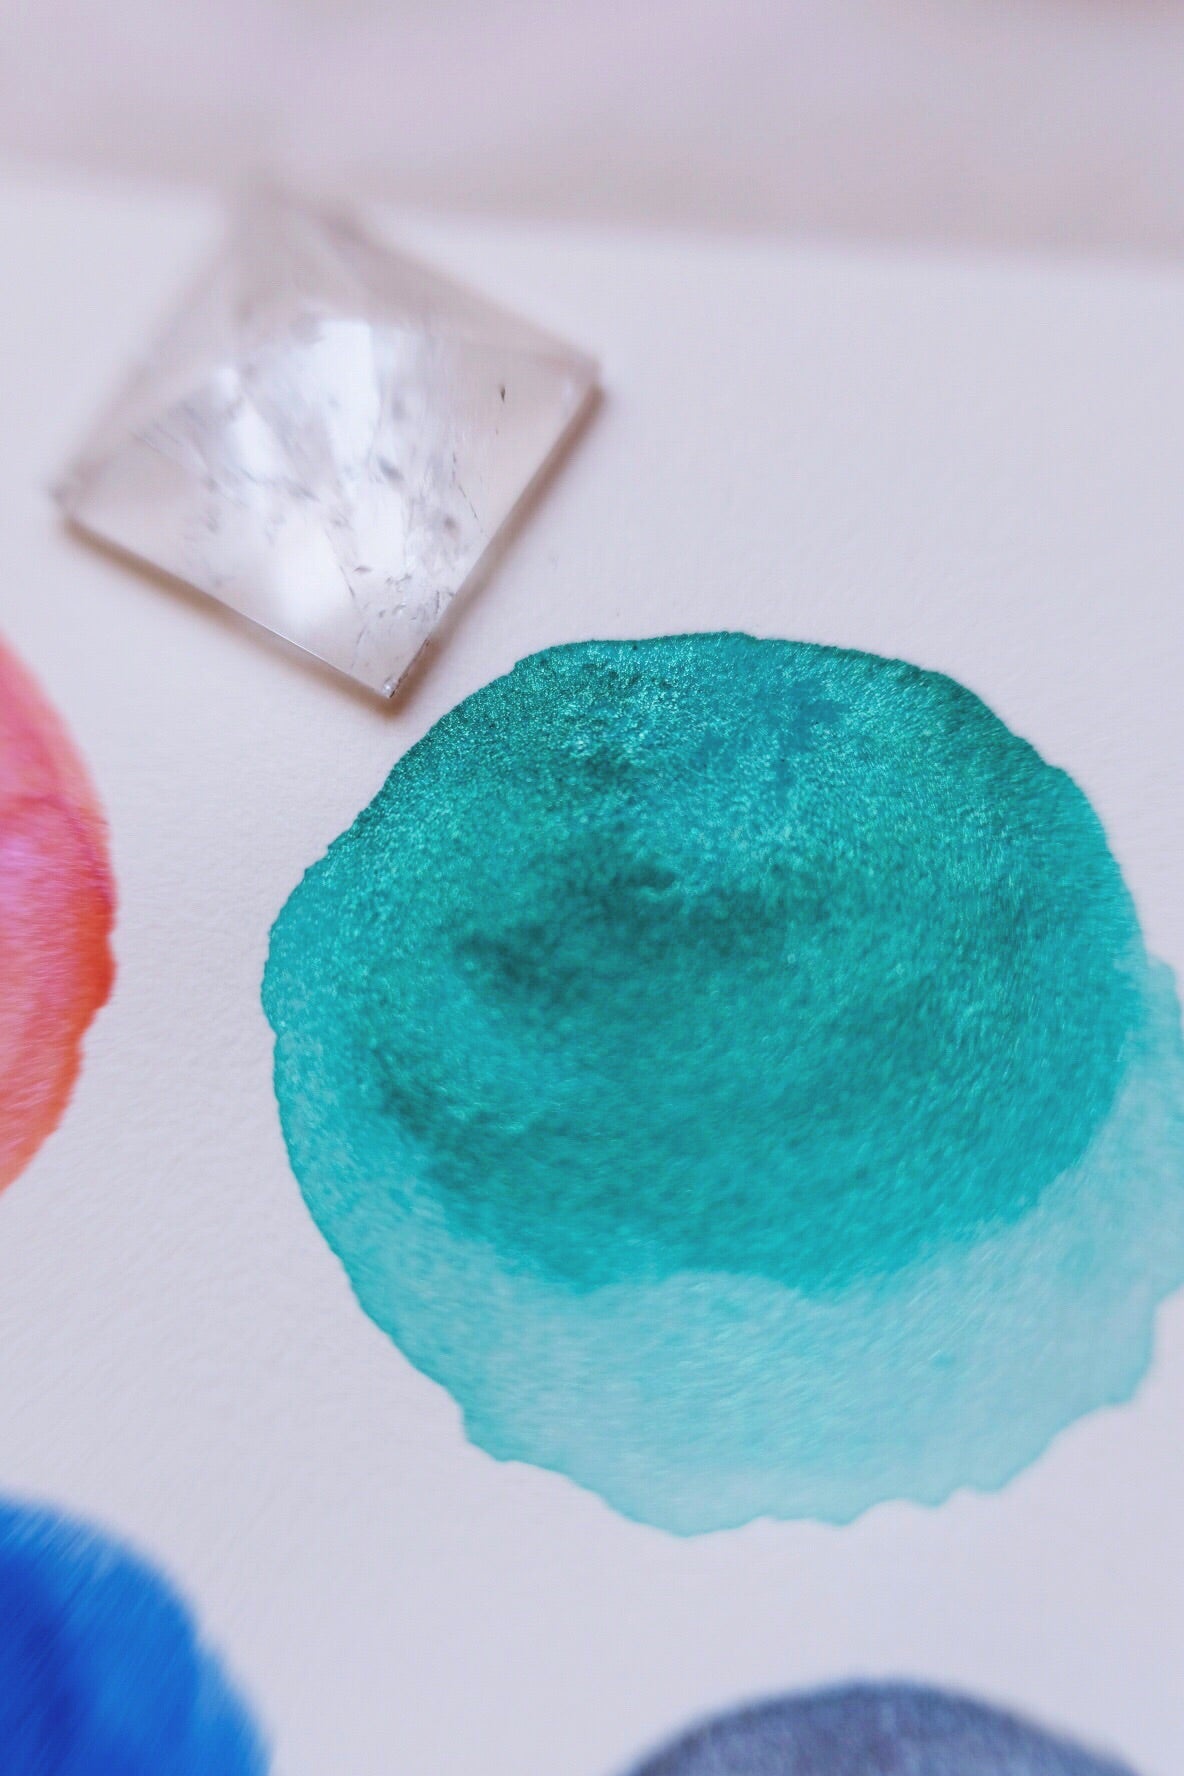 RESERVE for Jacqueline + Moons of Saturn + Limited Edition Mineral shimmer watercolor palette